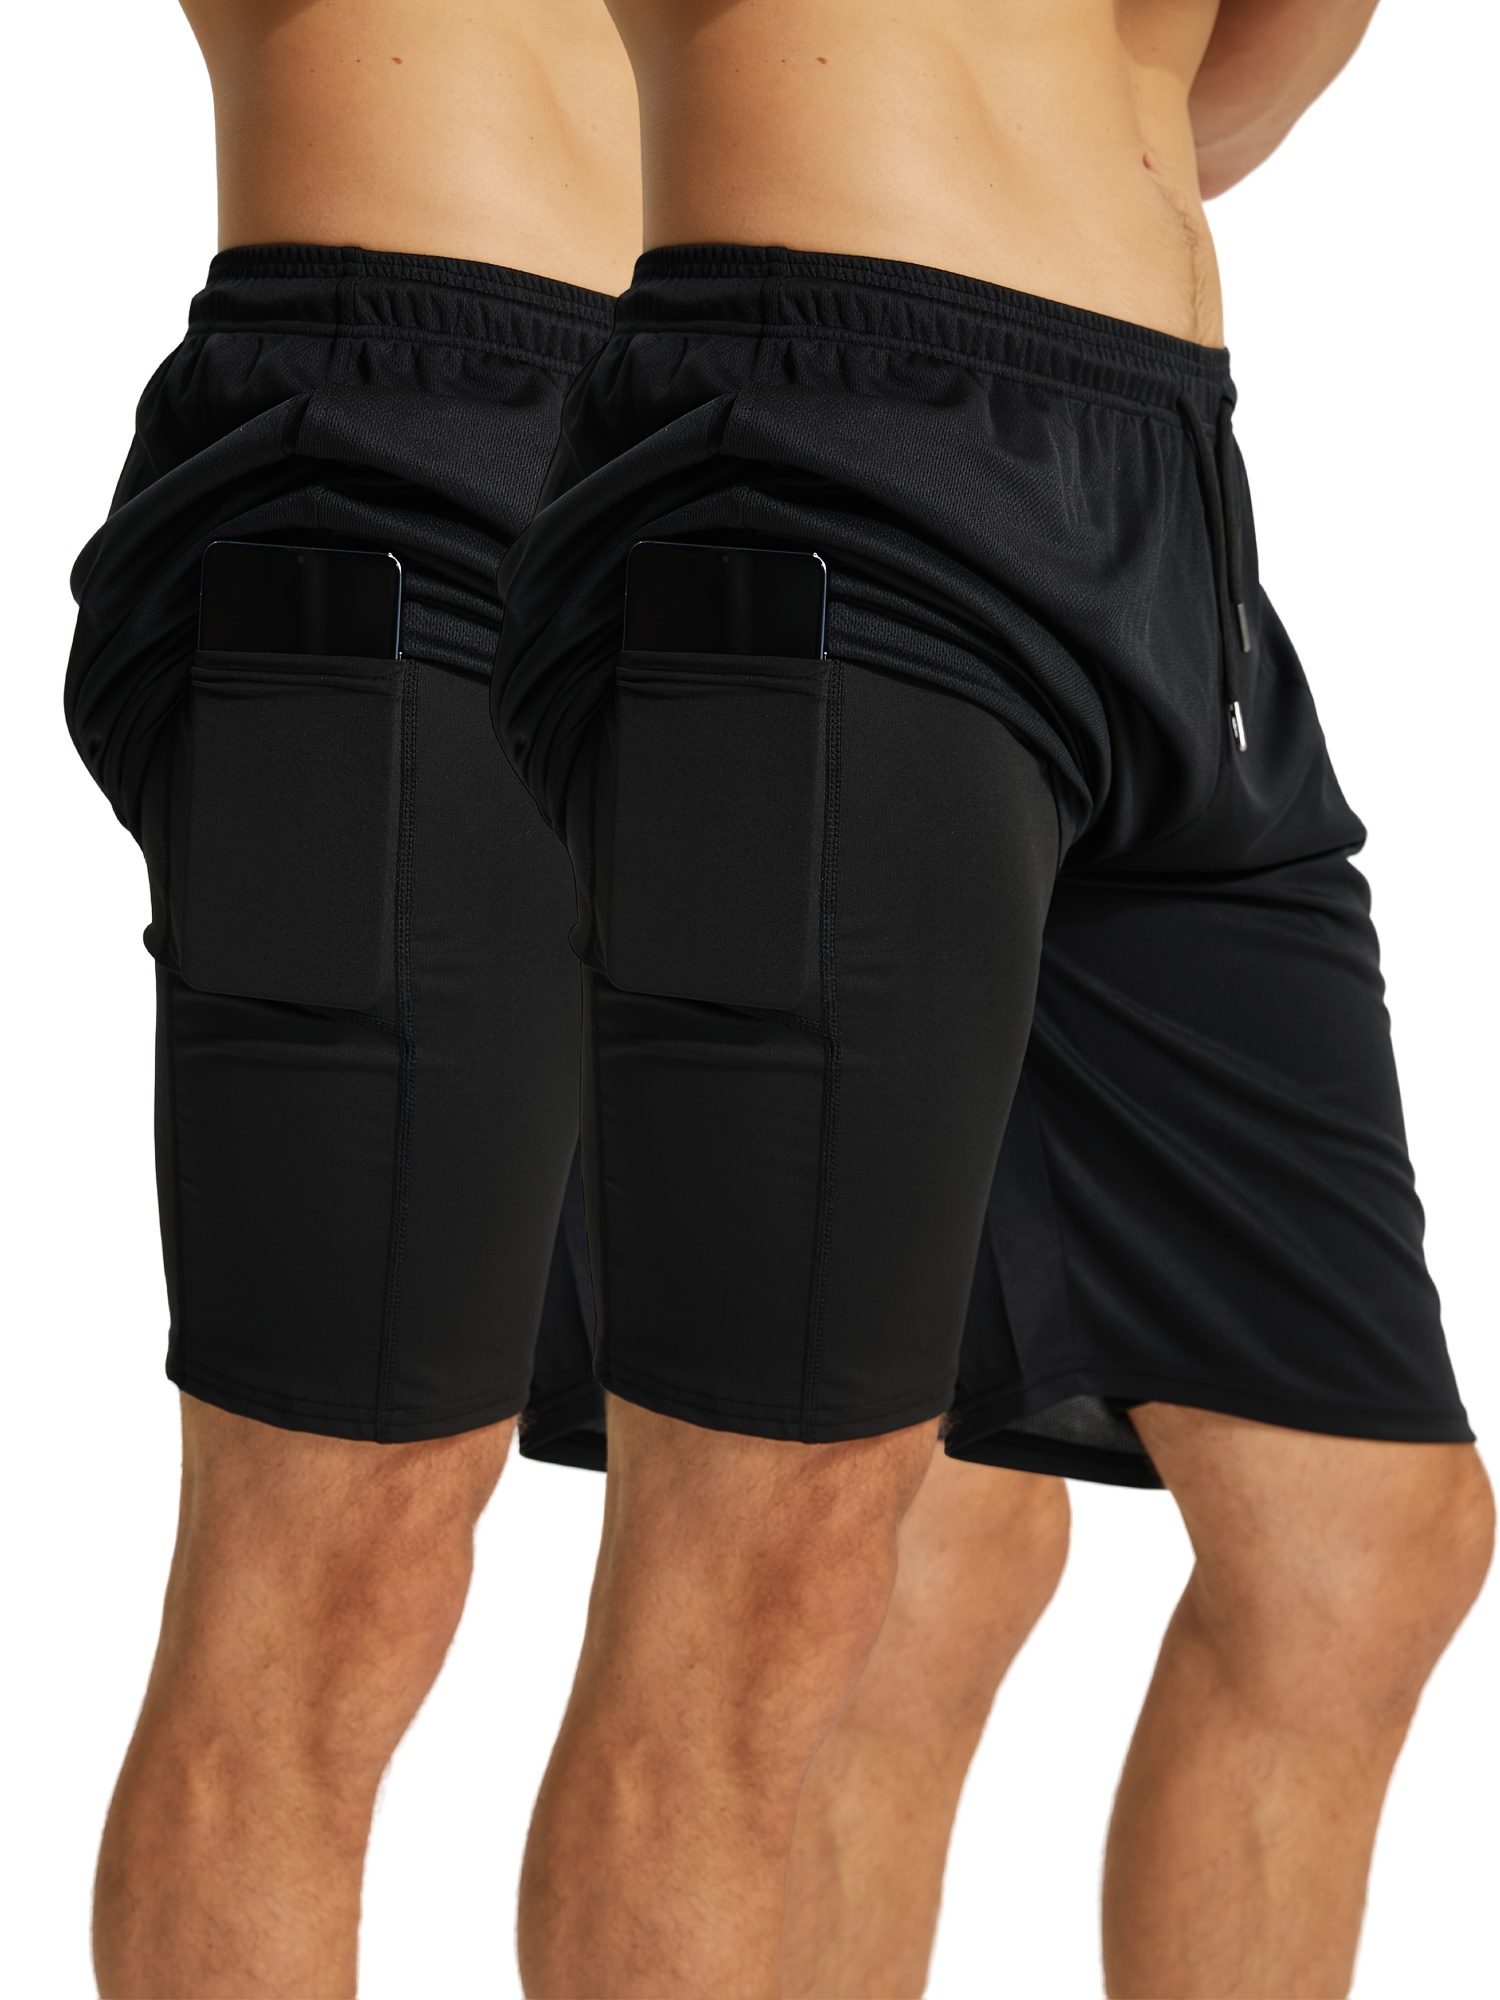 2 Pcs, Men's 2-in-1 Double Layer Quick-drying Breathable Shorts, Men's  Drawstring Slightly Stretch Sports Shorts And Pocket Skinny Fit Compression  Sho